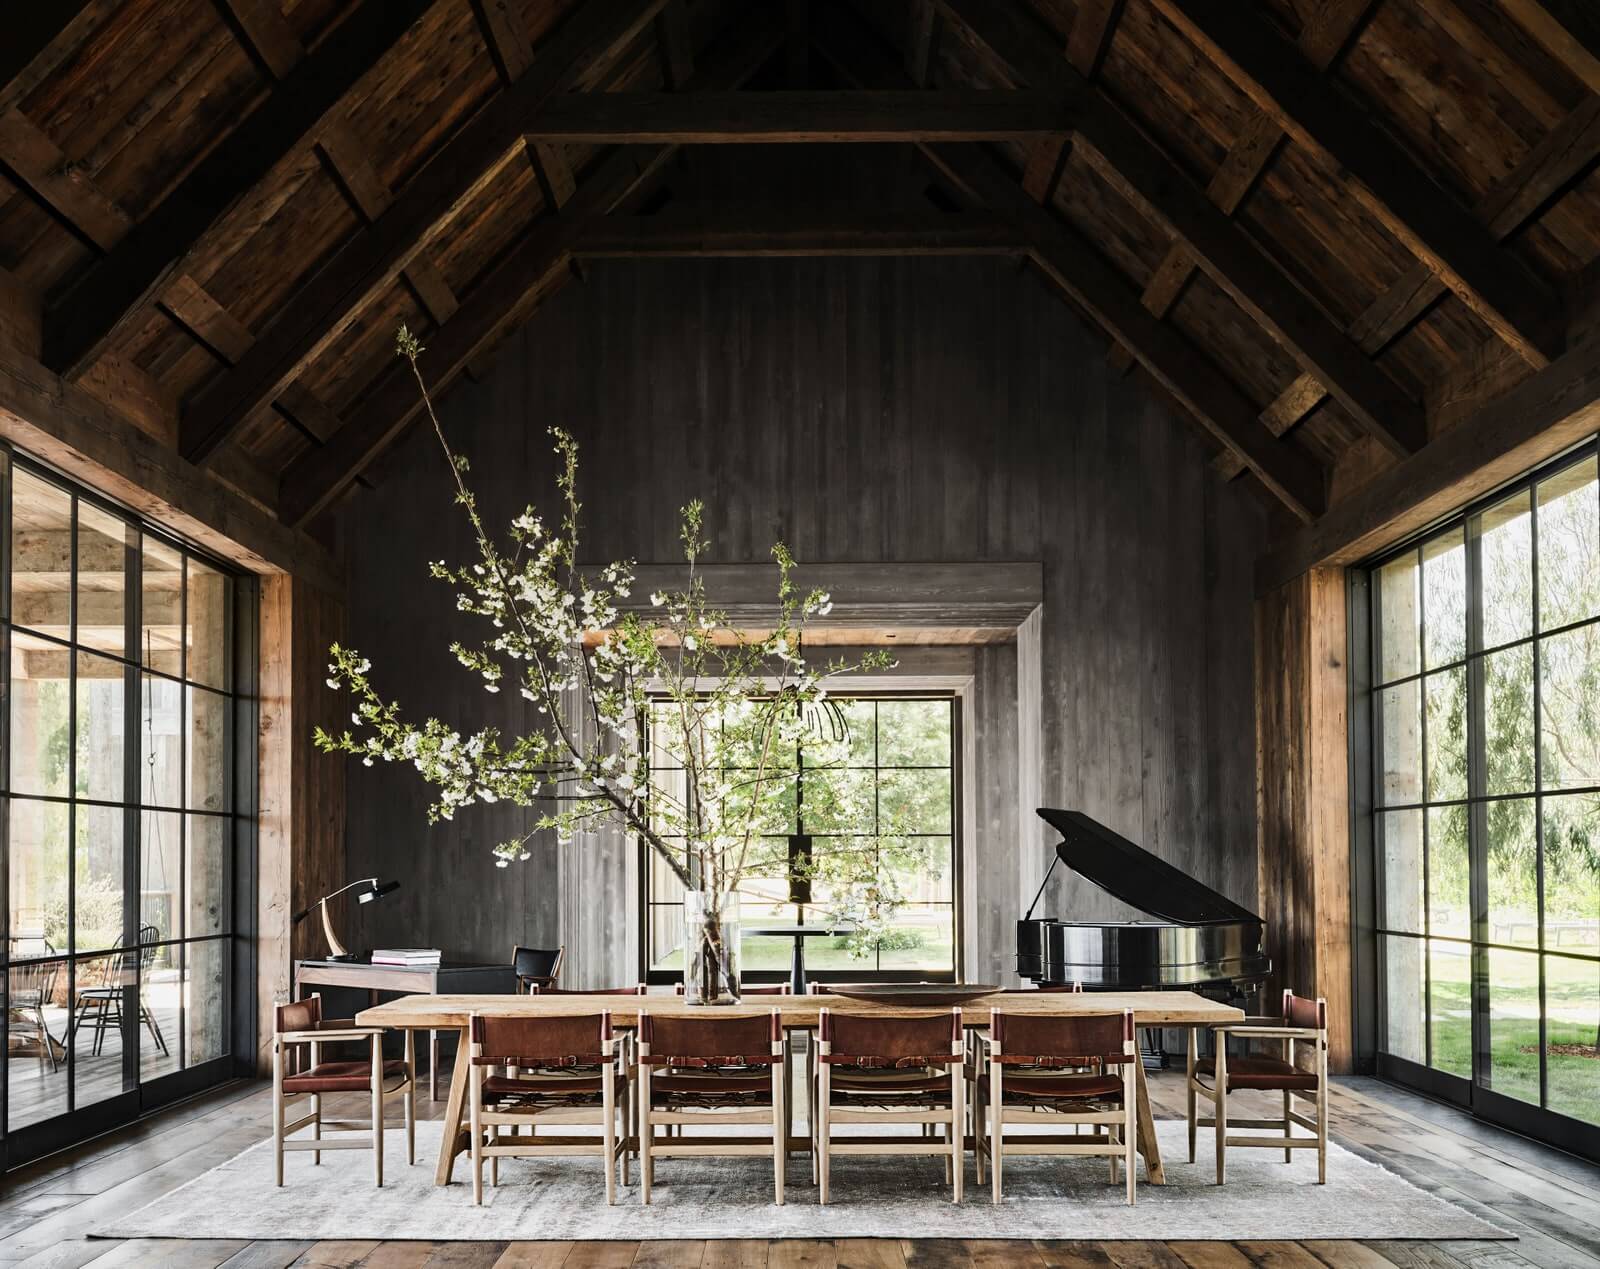 Celevrity Dining Rooms - Modern Farmhouse Rustic Interior Meets Contemporary Style